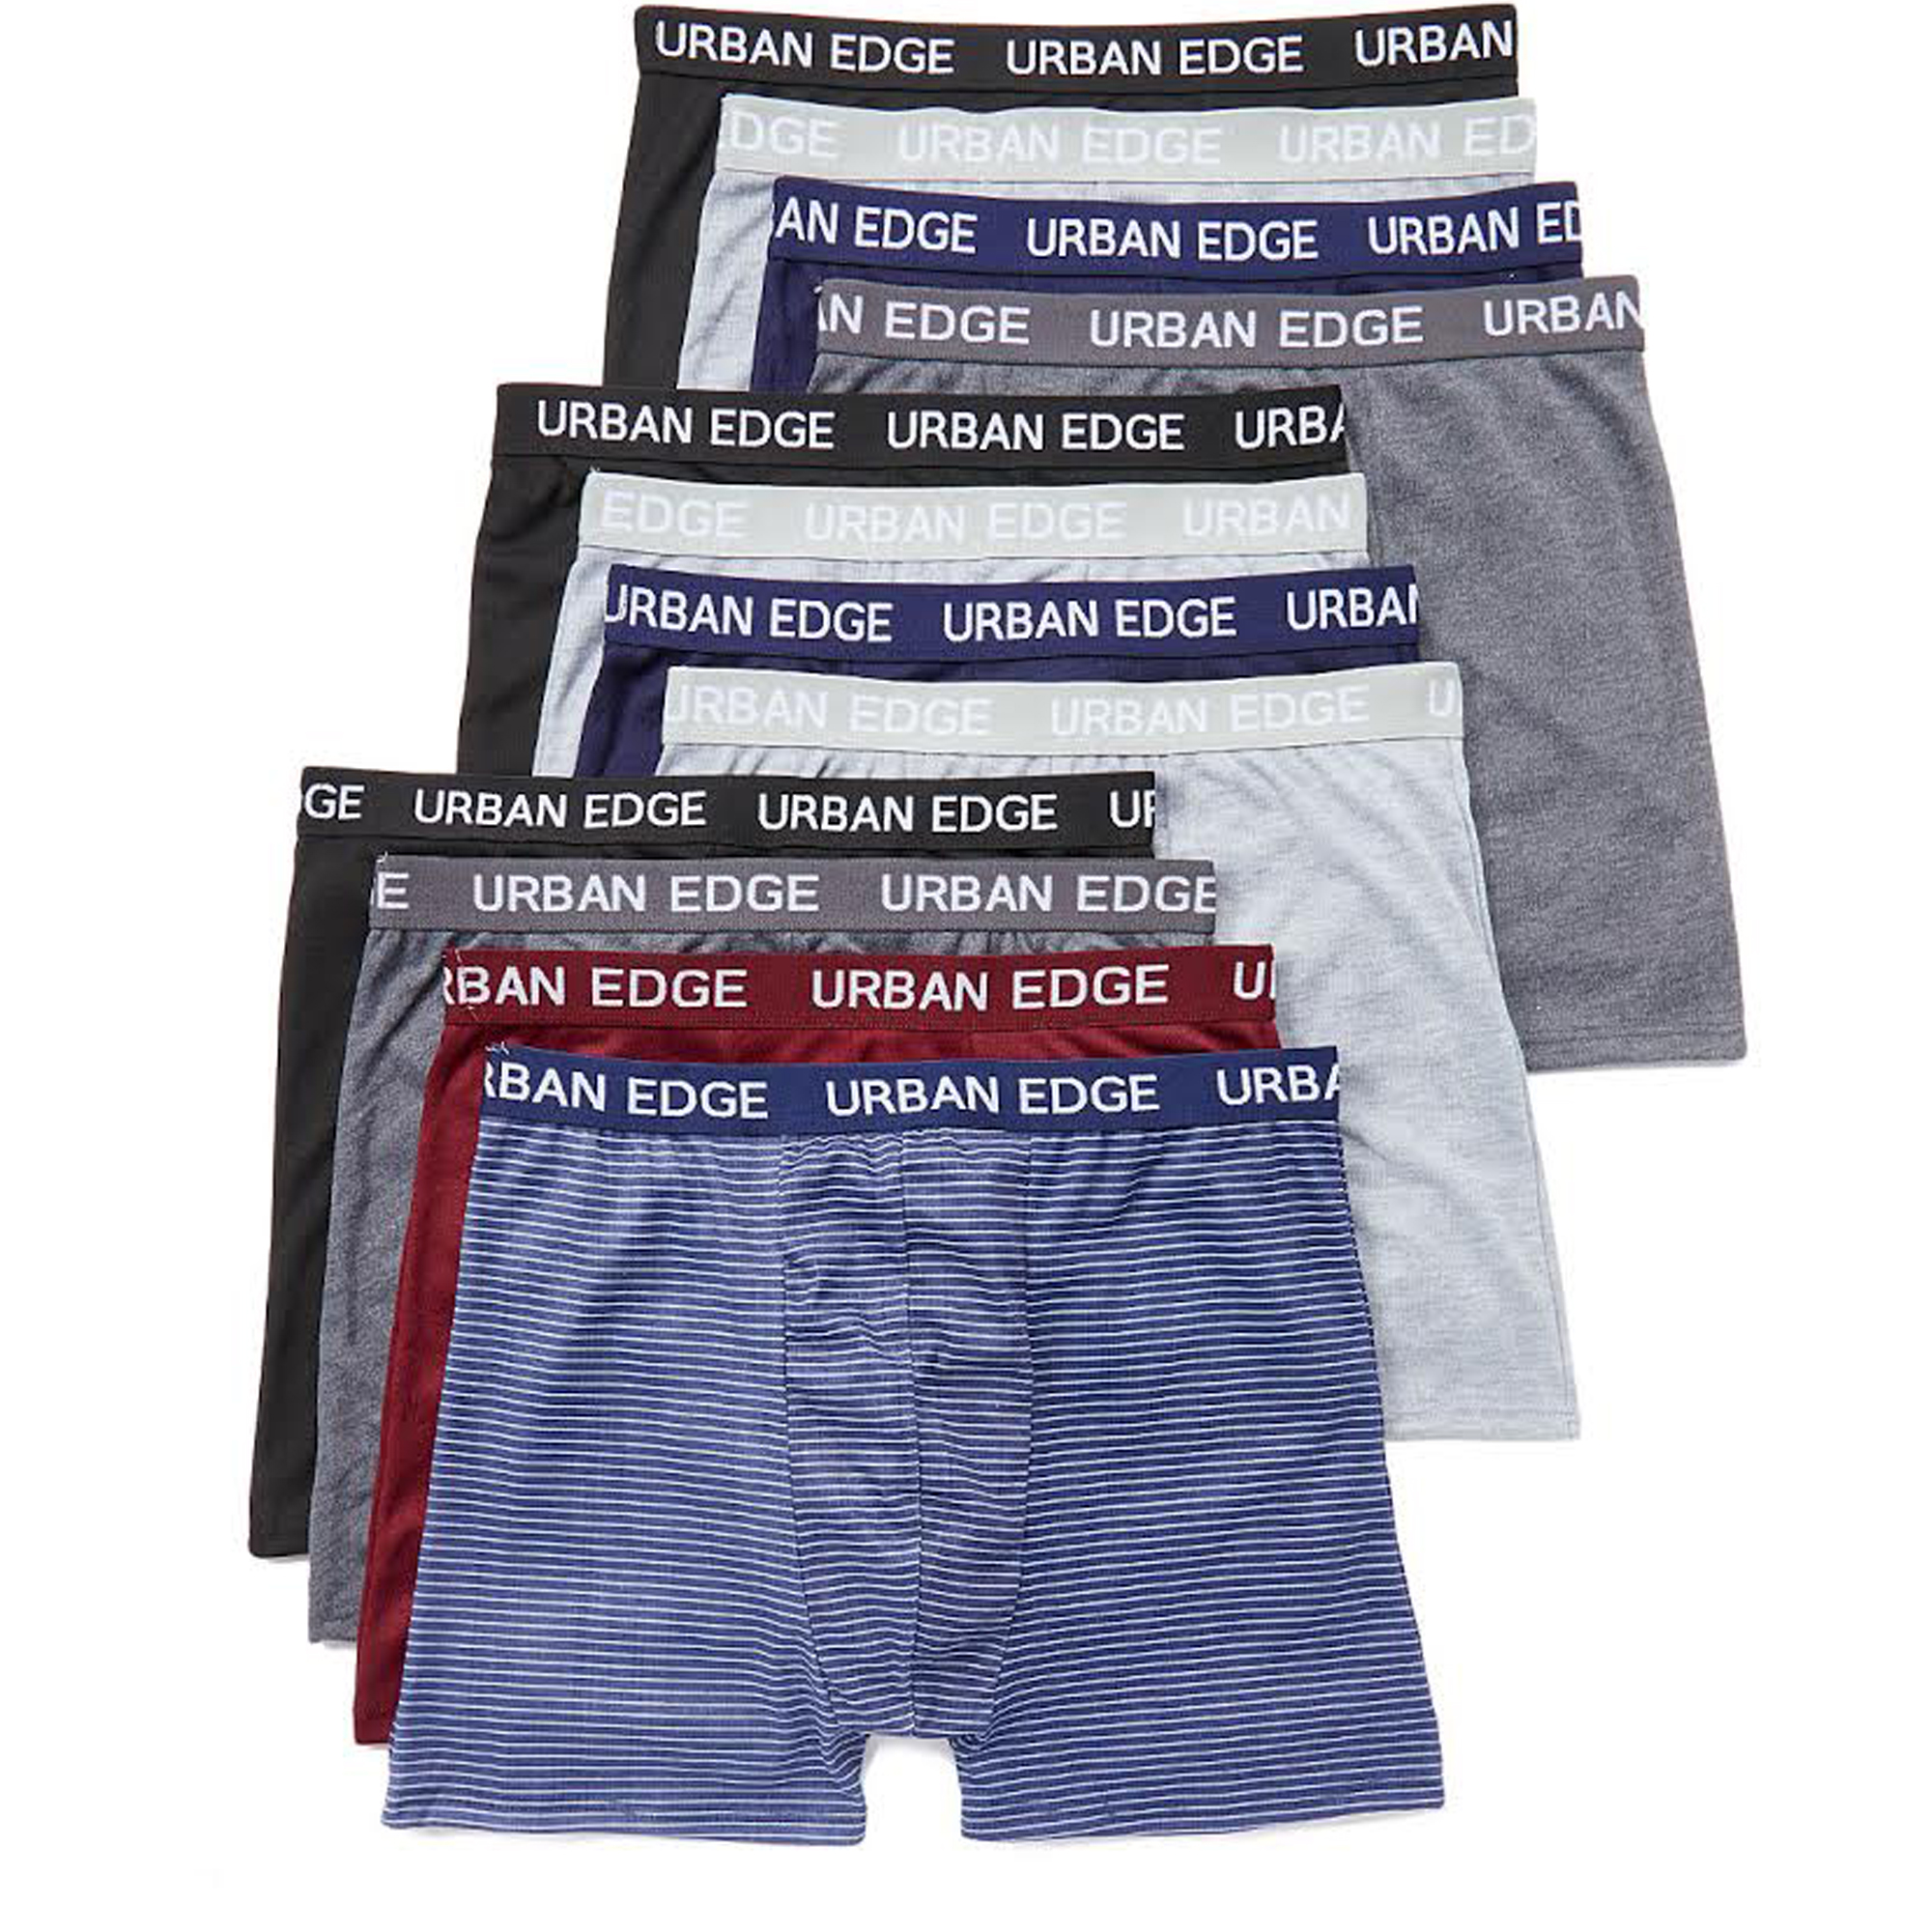 Wholesale Briefs now available at Wholesale Central